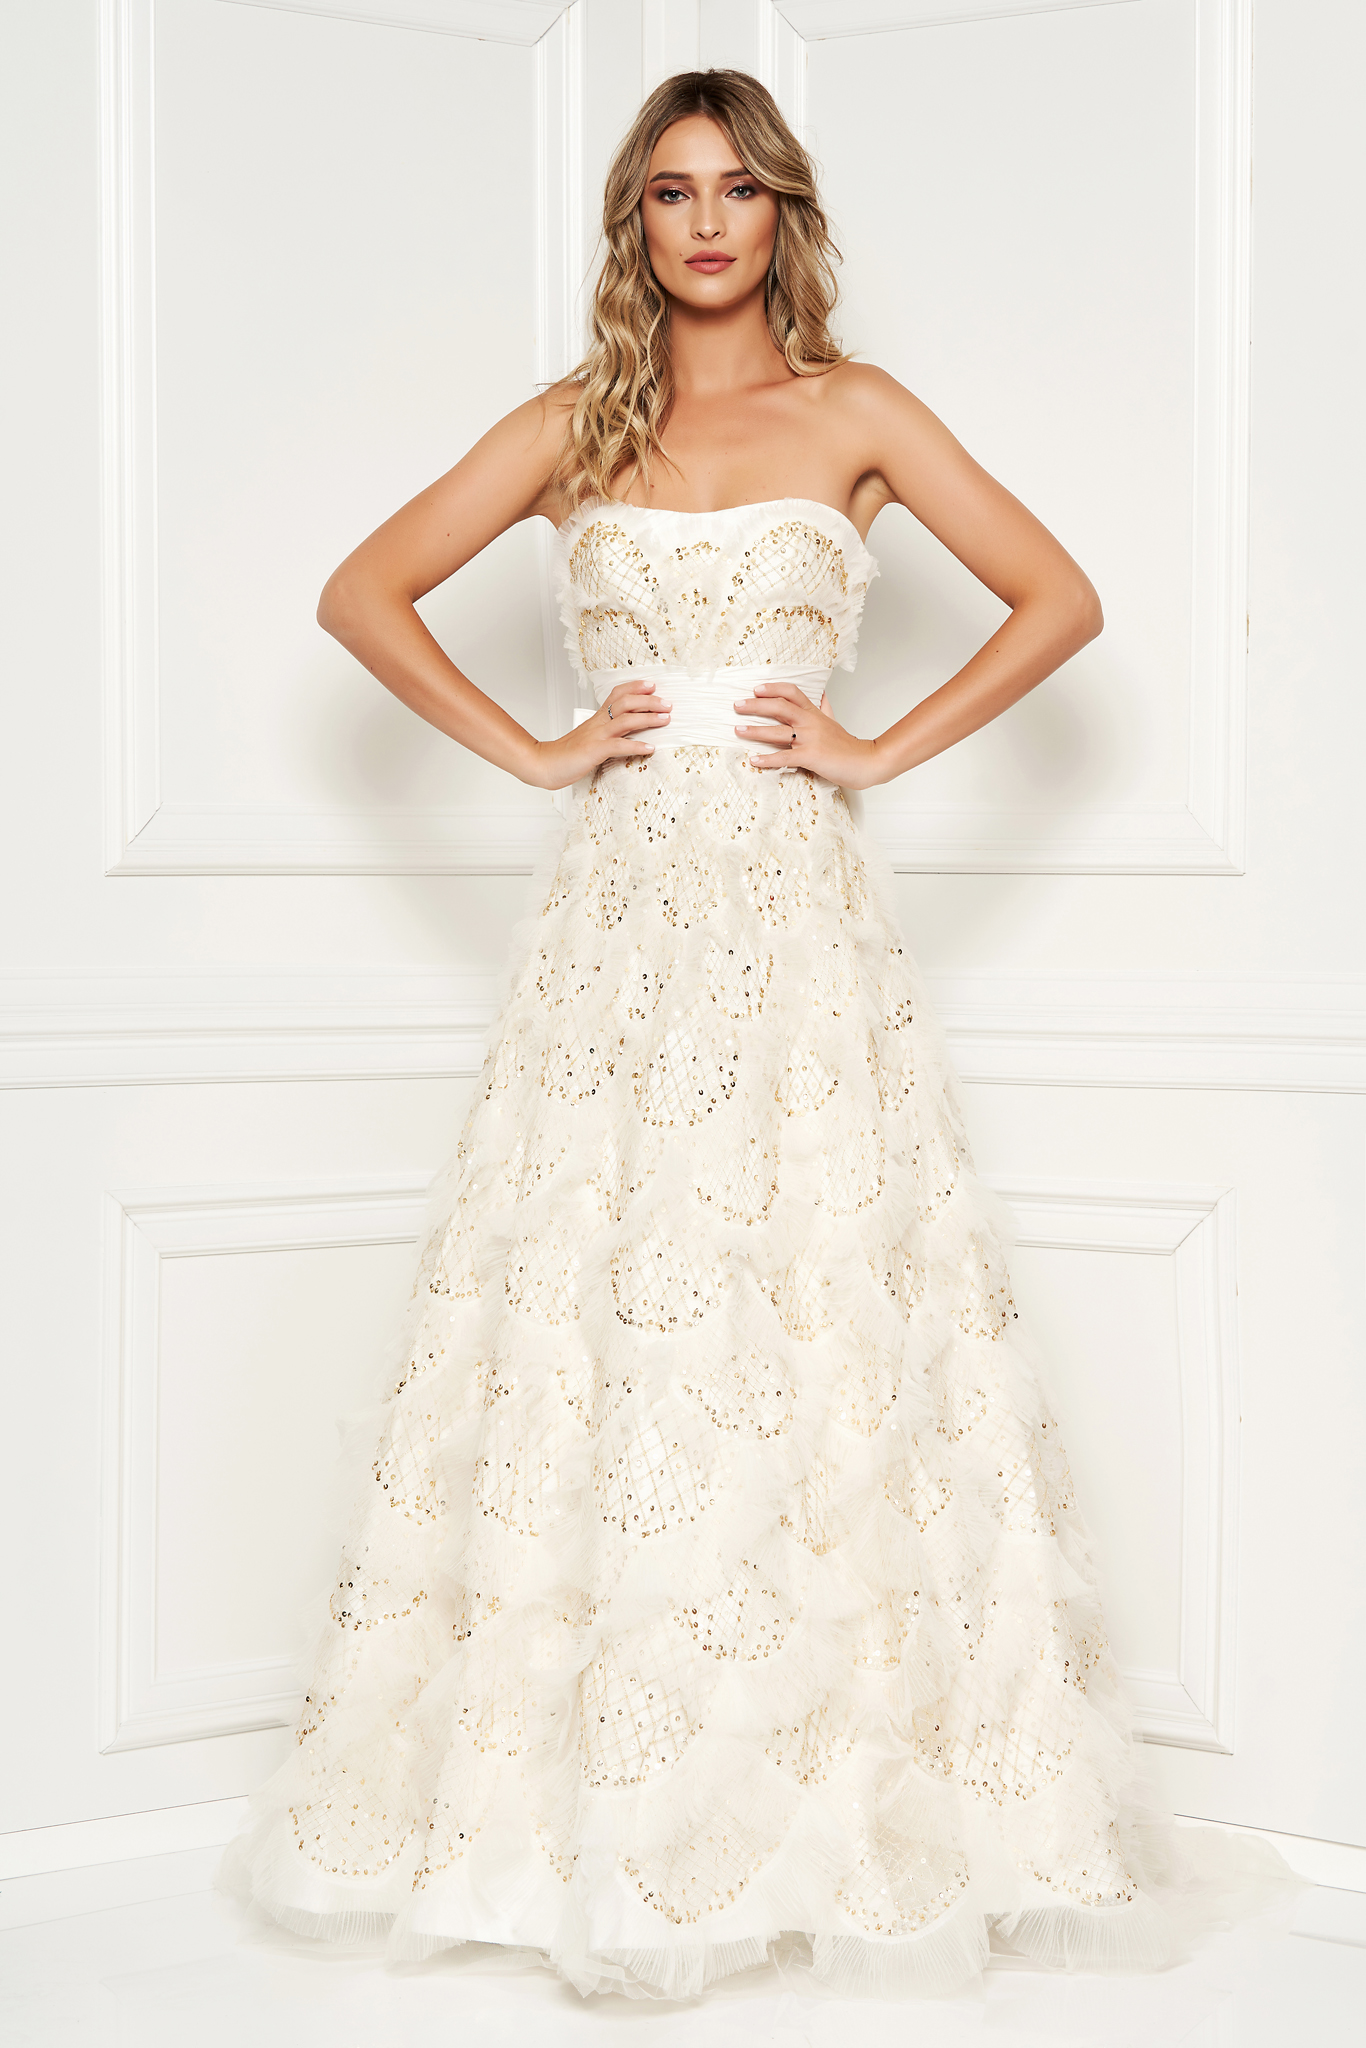 Sherri Hill luxurious white lace dress with crystal embellished details 1 - StarShinerS.com